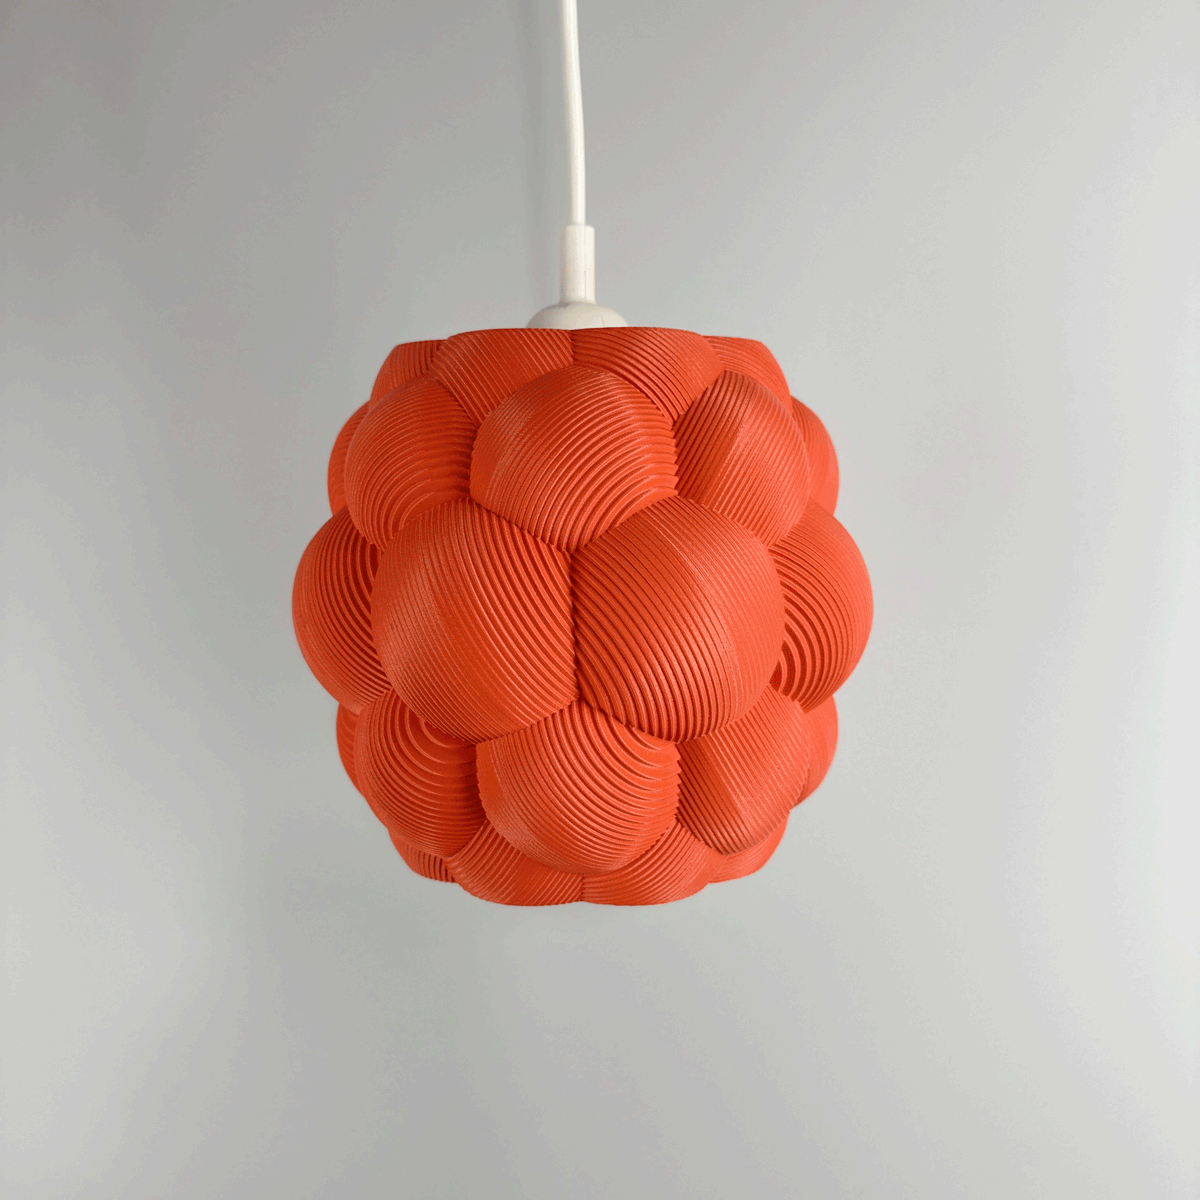 3D printed Apo Malli lampshade in modern design in muted red biodegradable material. Used with 400k LED bulb on and off